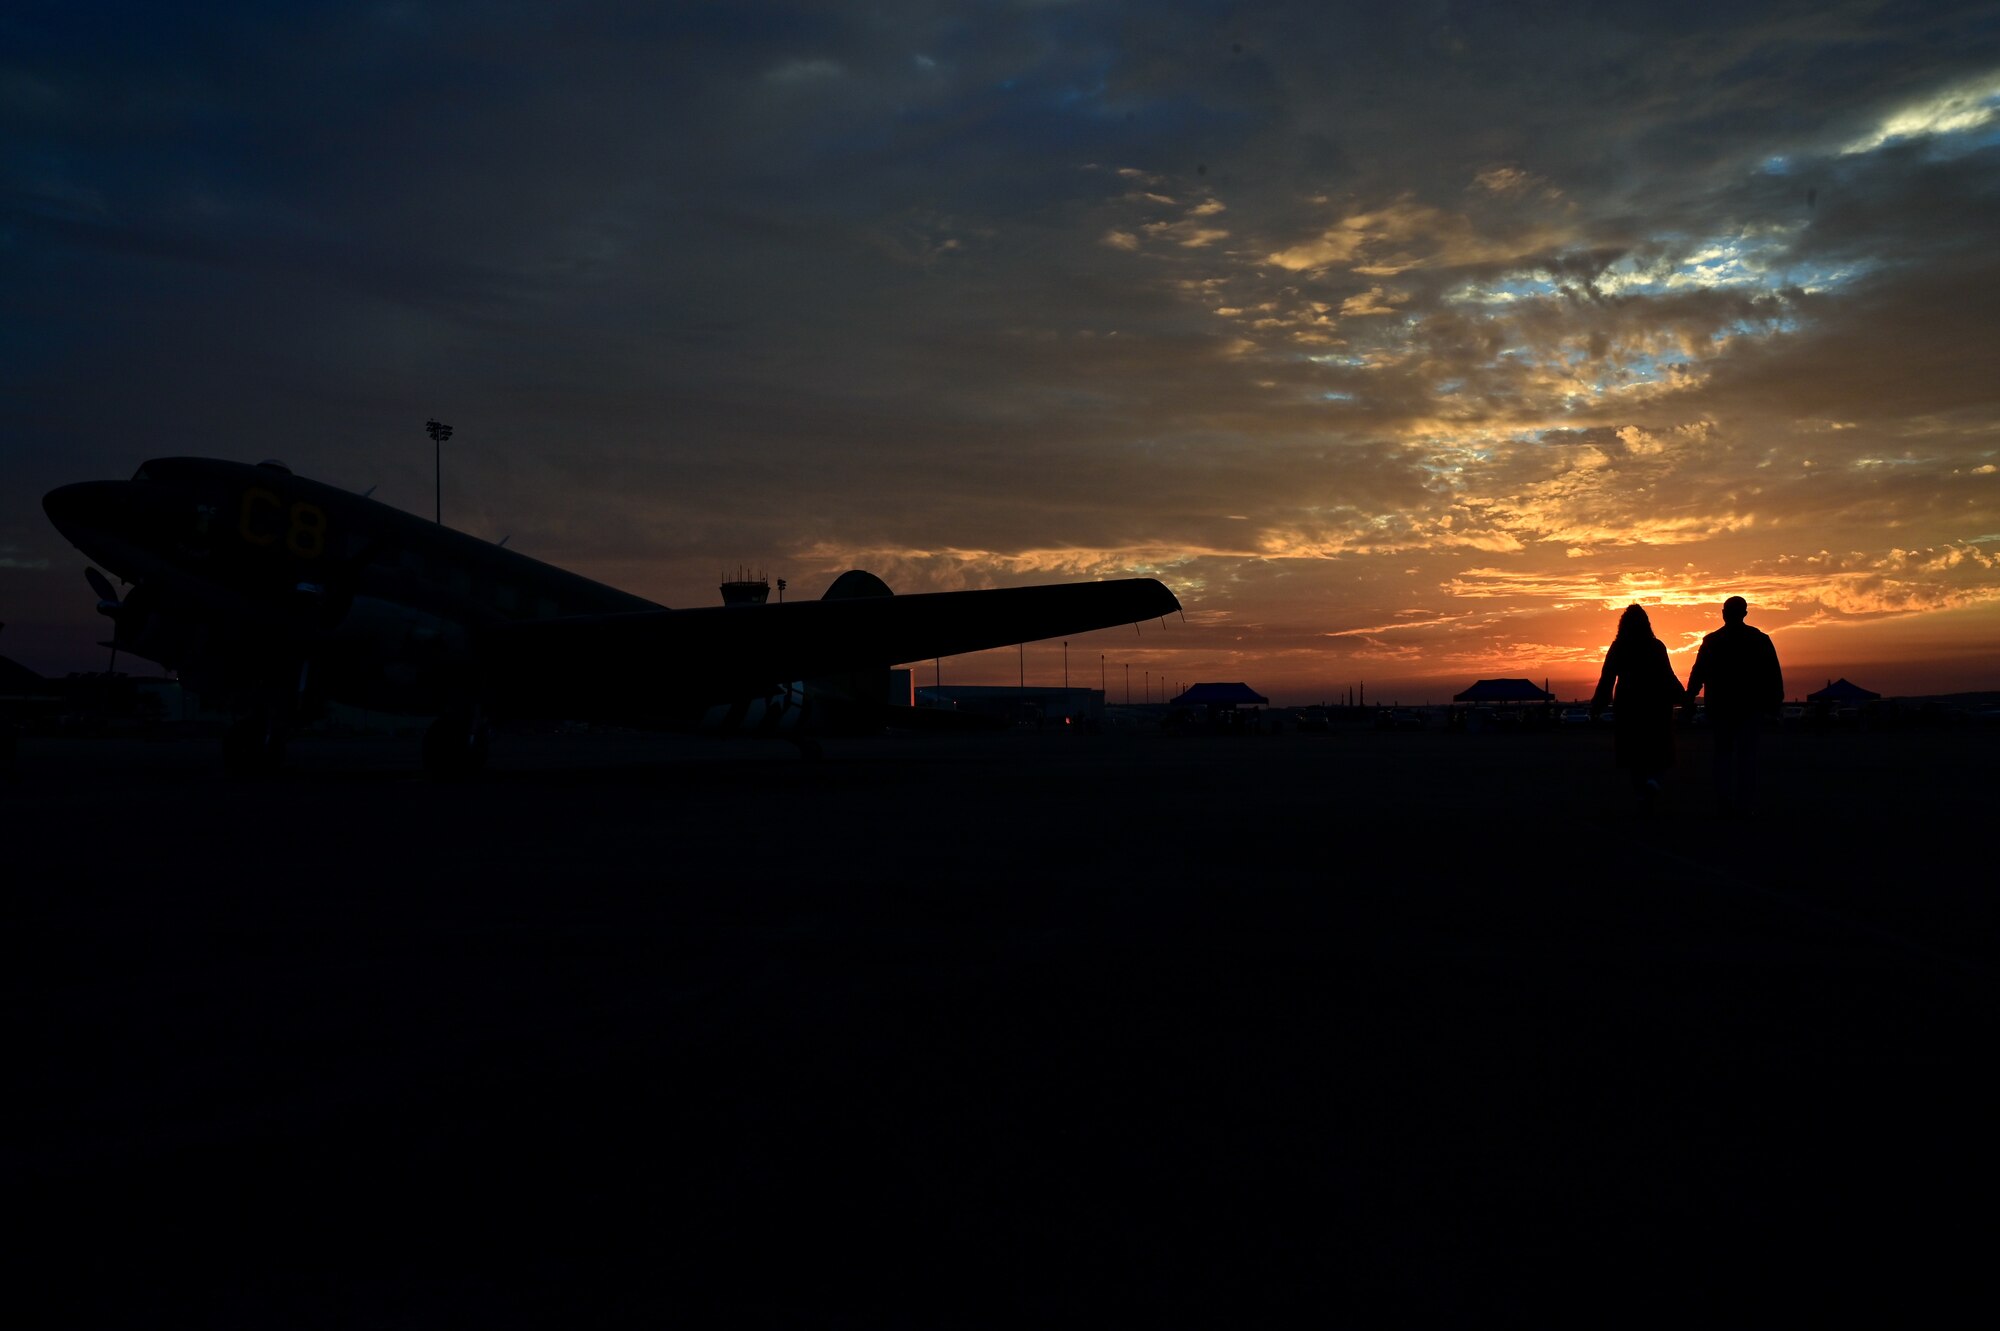 A couple walks behind a heritage Aircraft at sunset